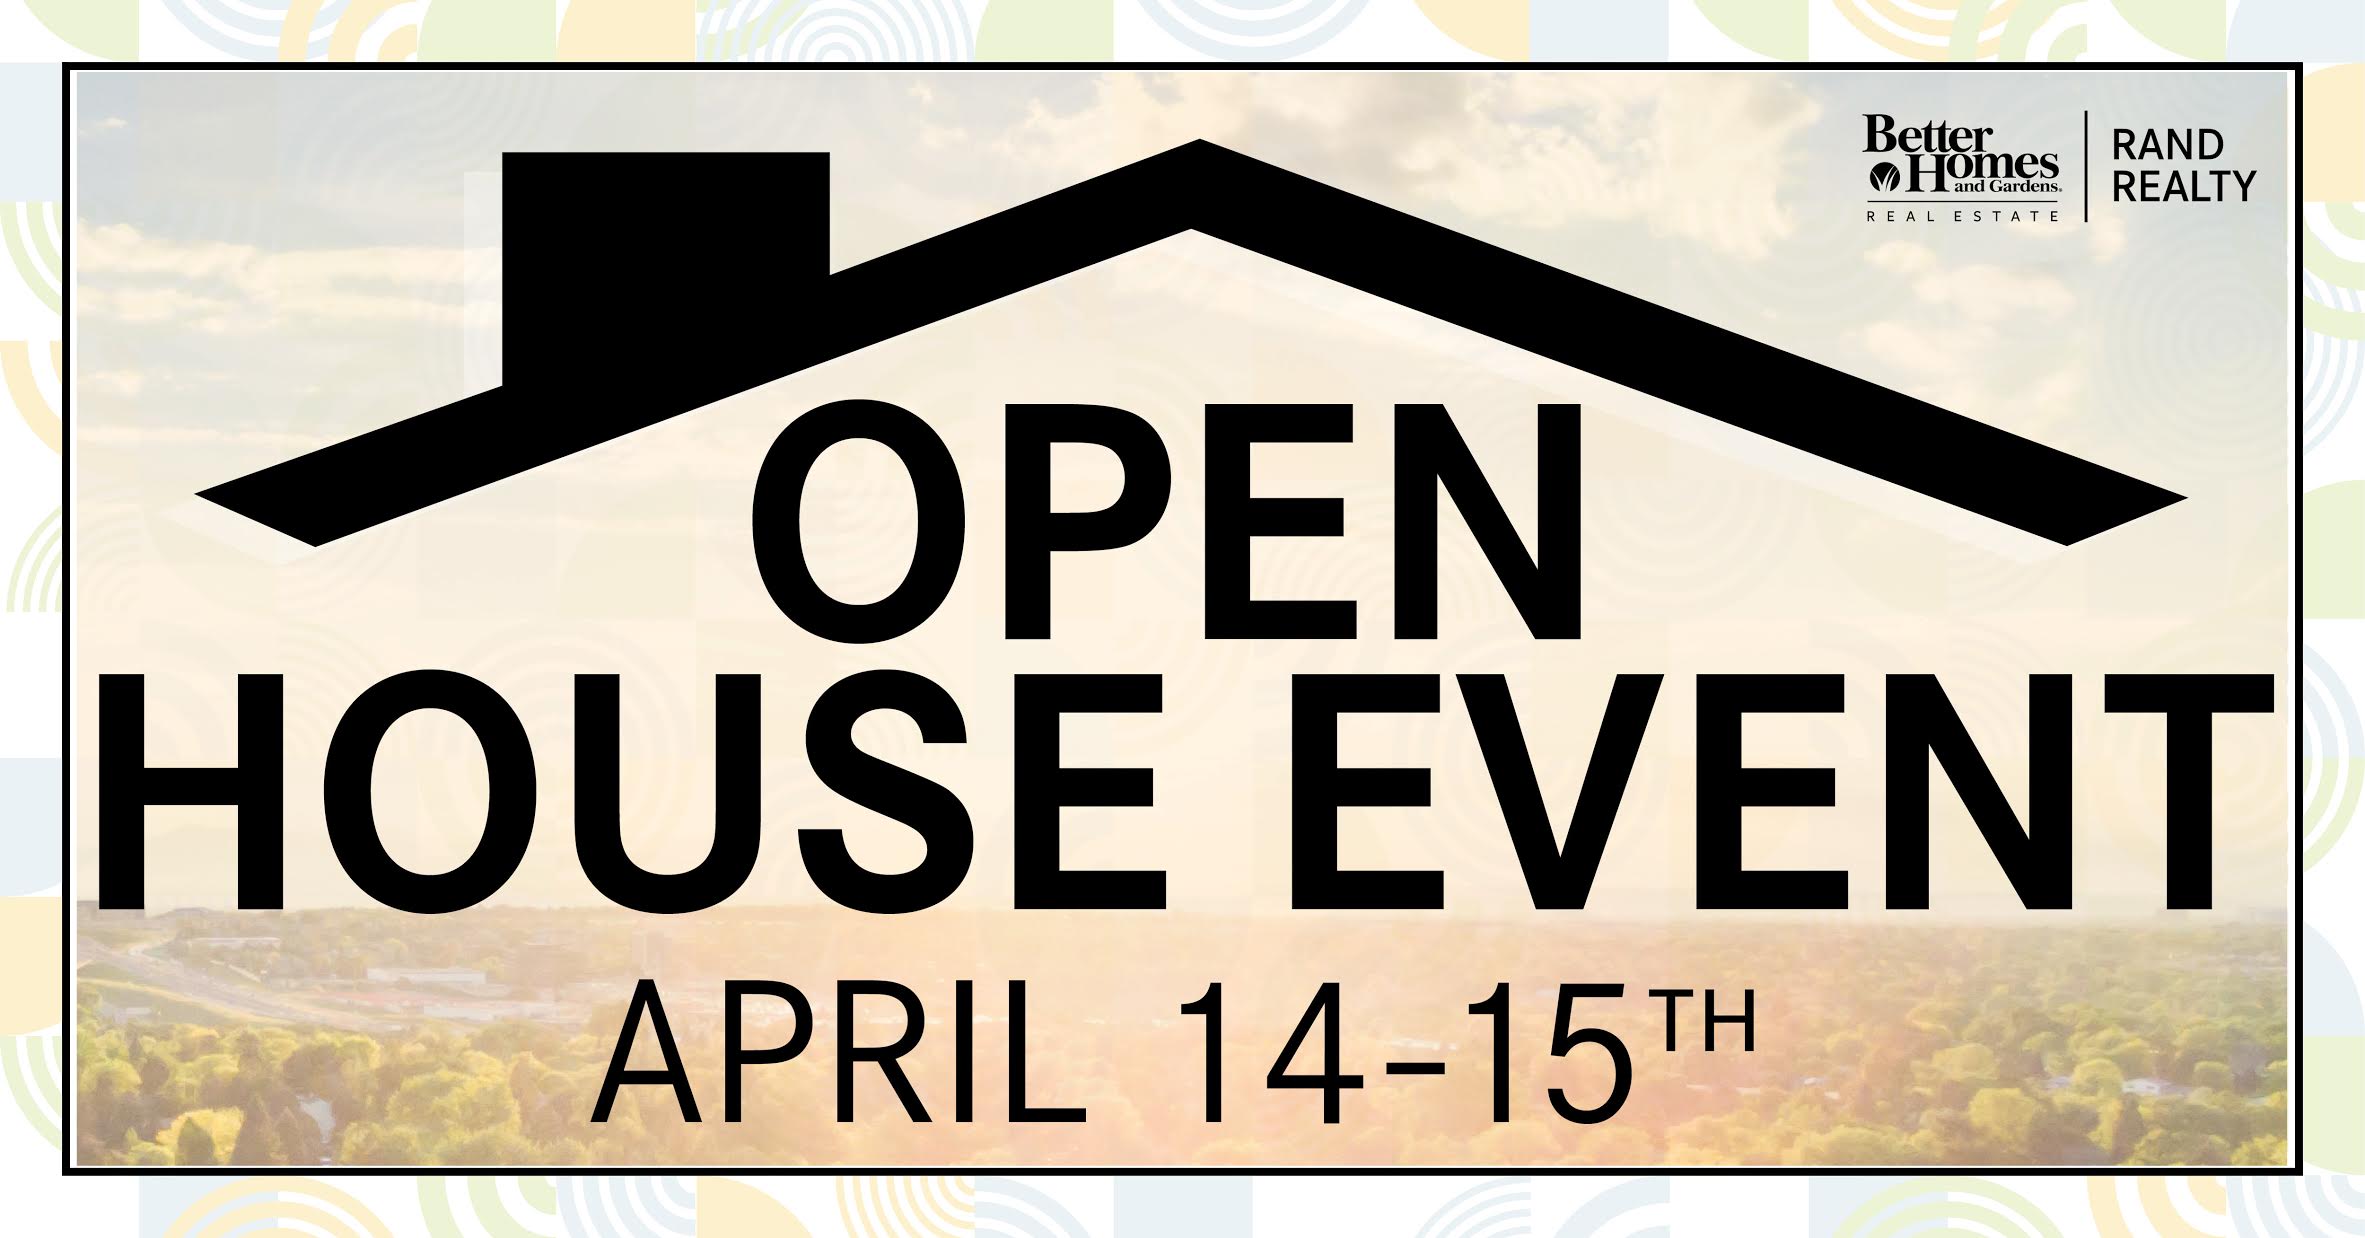 Better Homes and Gardens Rand Realty to Hold Open-House Event - Howard